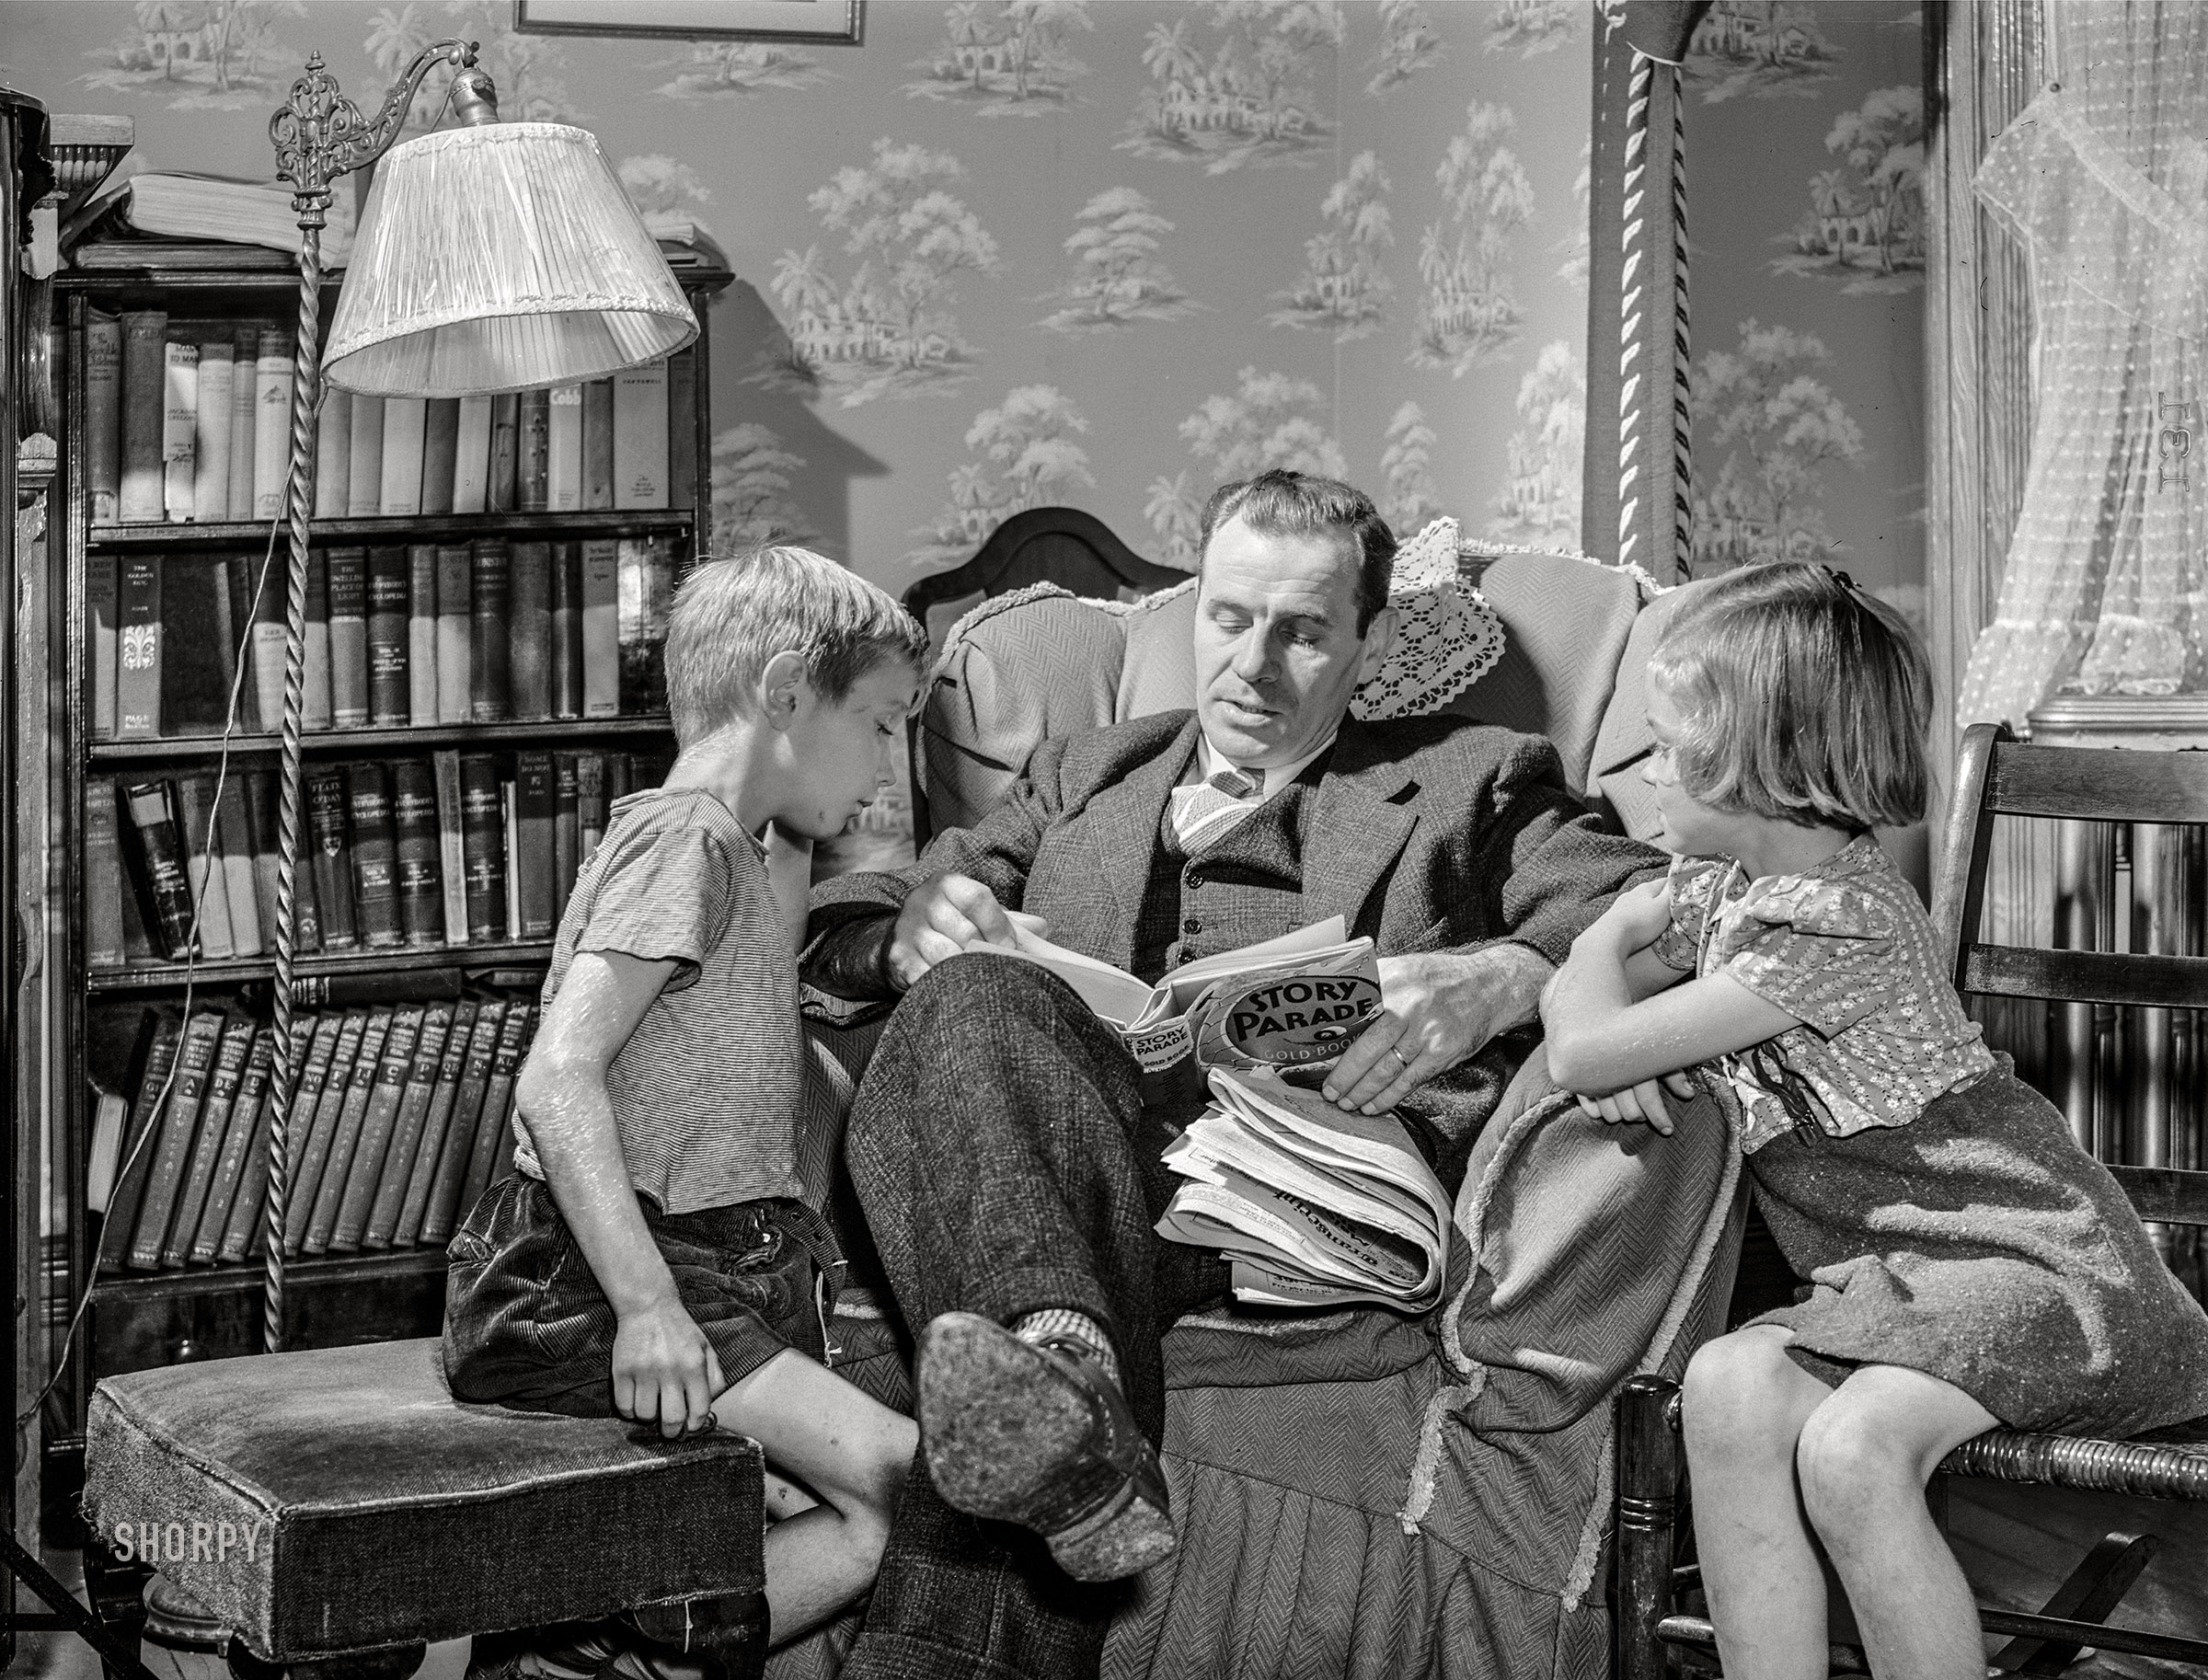 October 1941. "Williamstown, Massachusetts. Father reading to his children." Medium format acetate negative by John Collier for the Farm Security Administration. View full size.